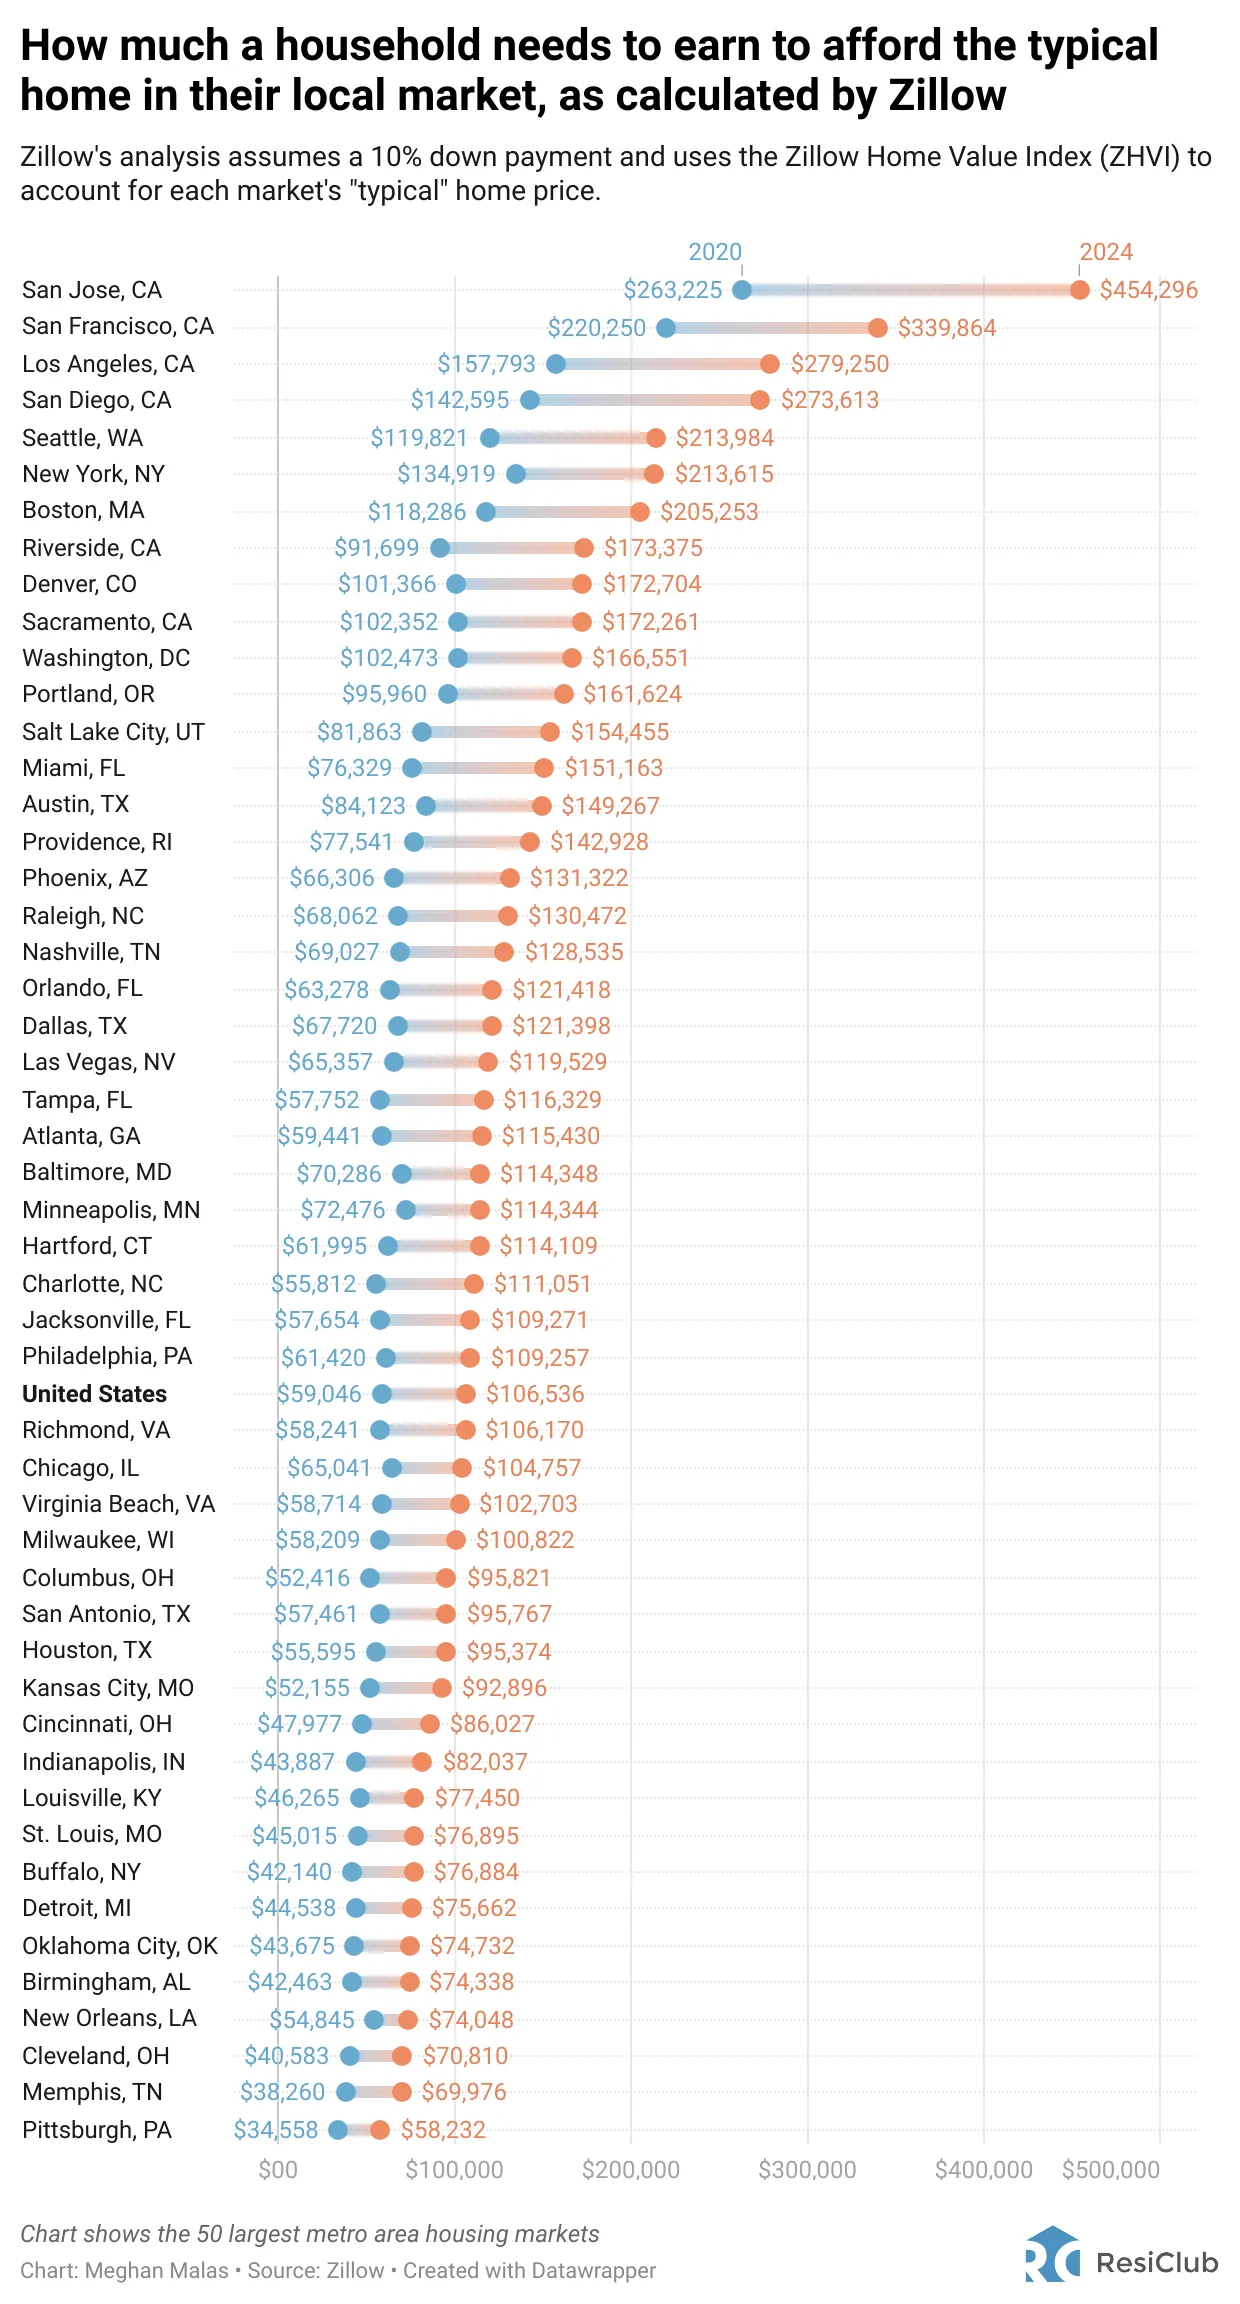 Income required to afford a typical median priced home per top 50 cities